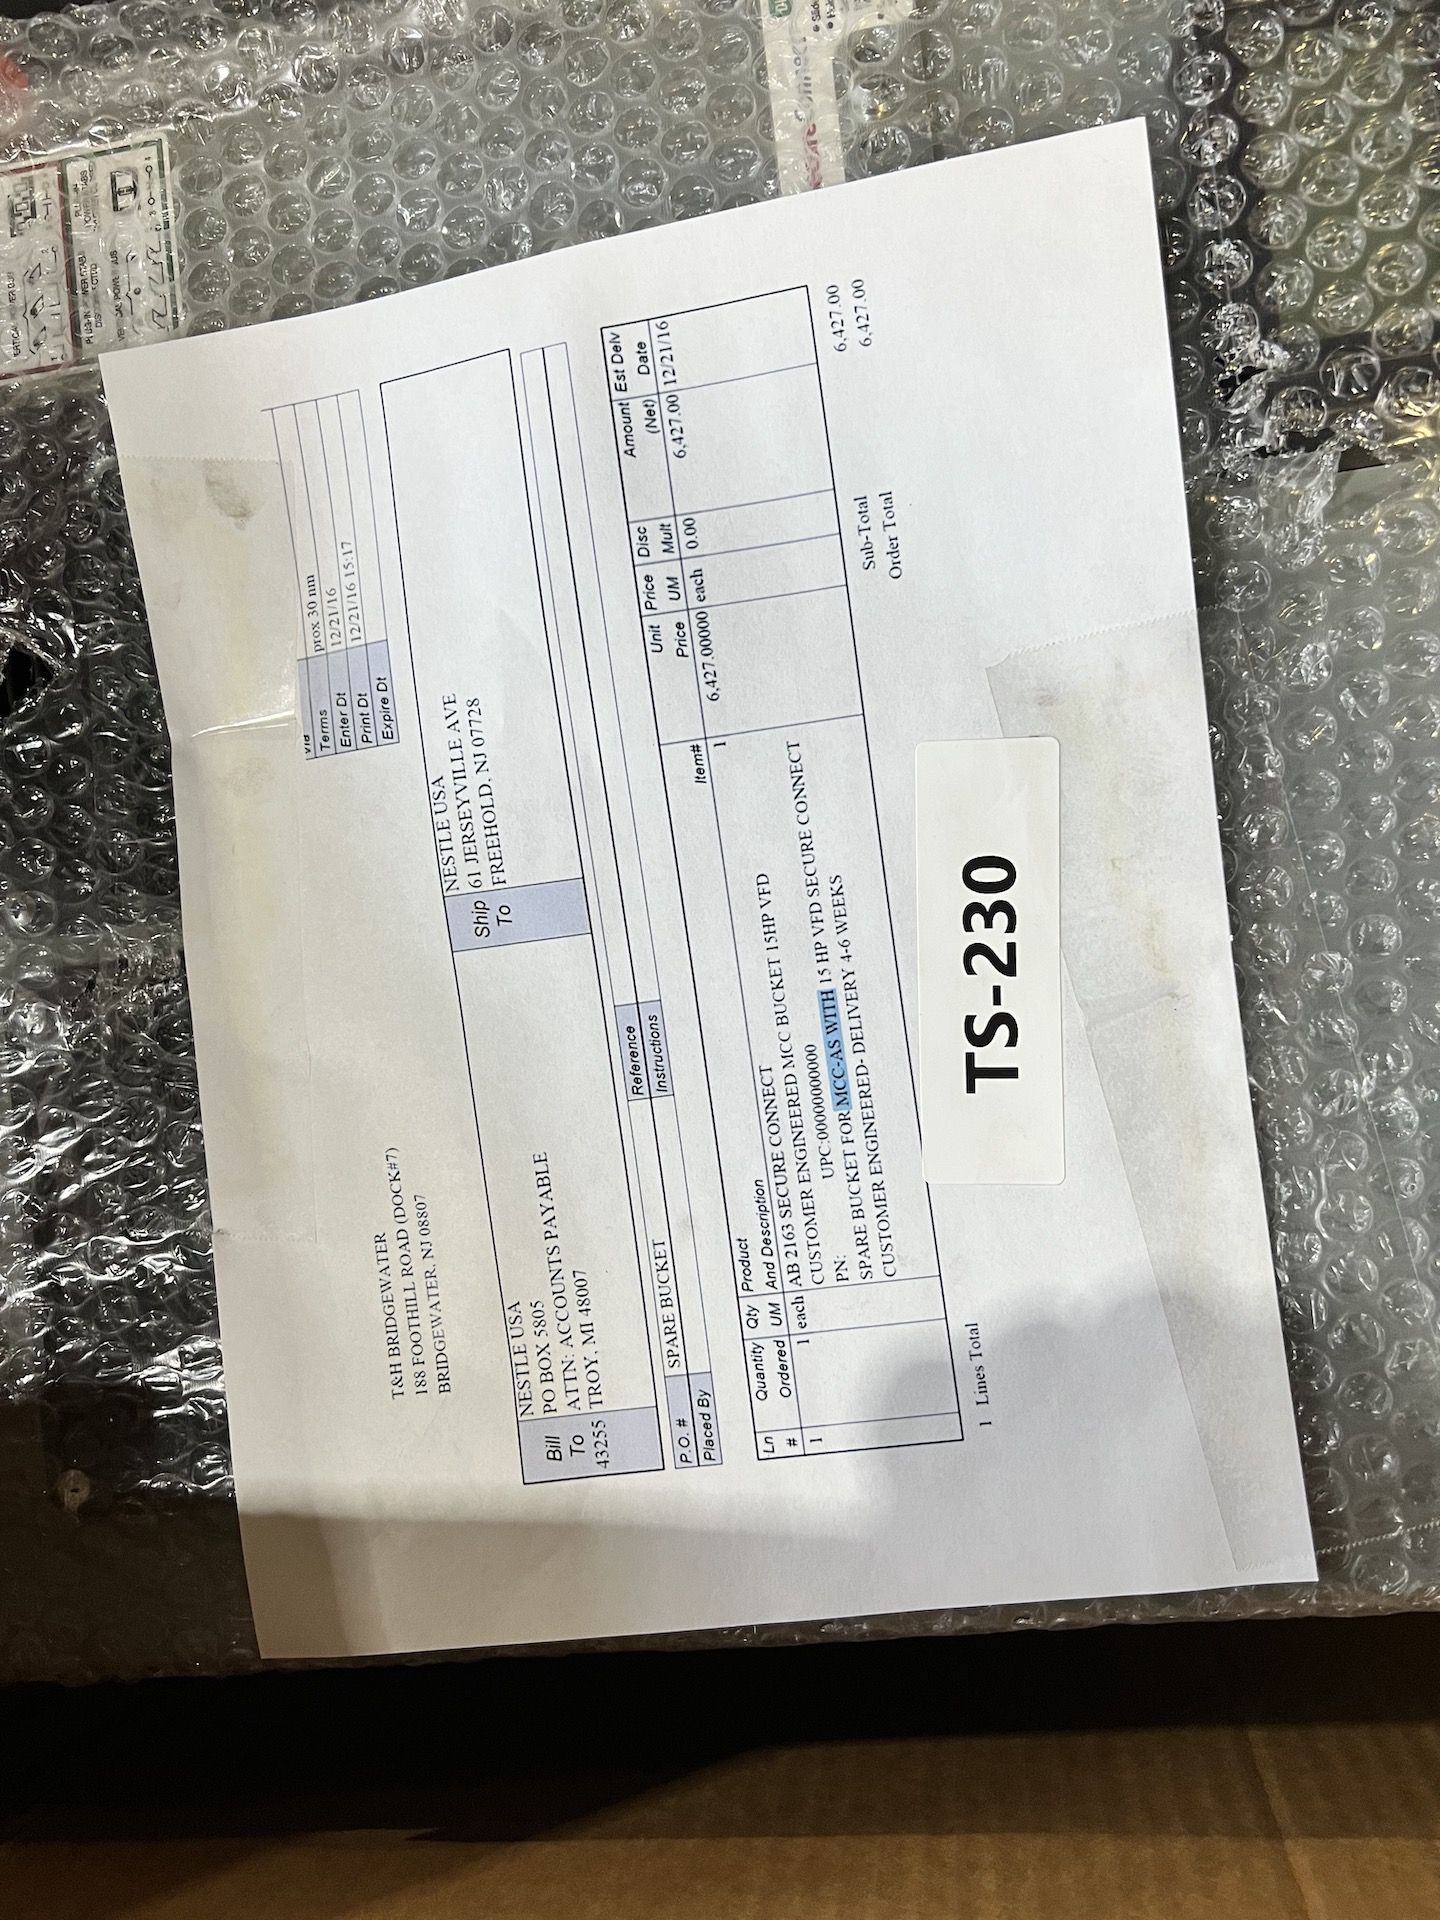 NEW Allen Bradley # 2163 MCC Bucket With 15 HP VFD Secure Connect (SIMPLE LOADING FEE $220) - Image 4 of 7